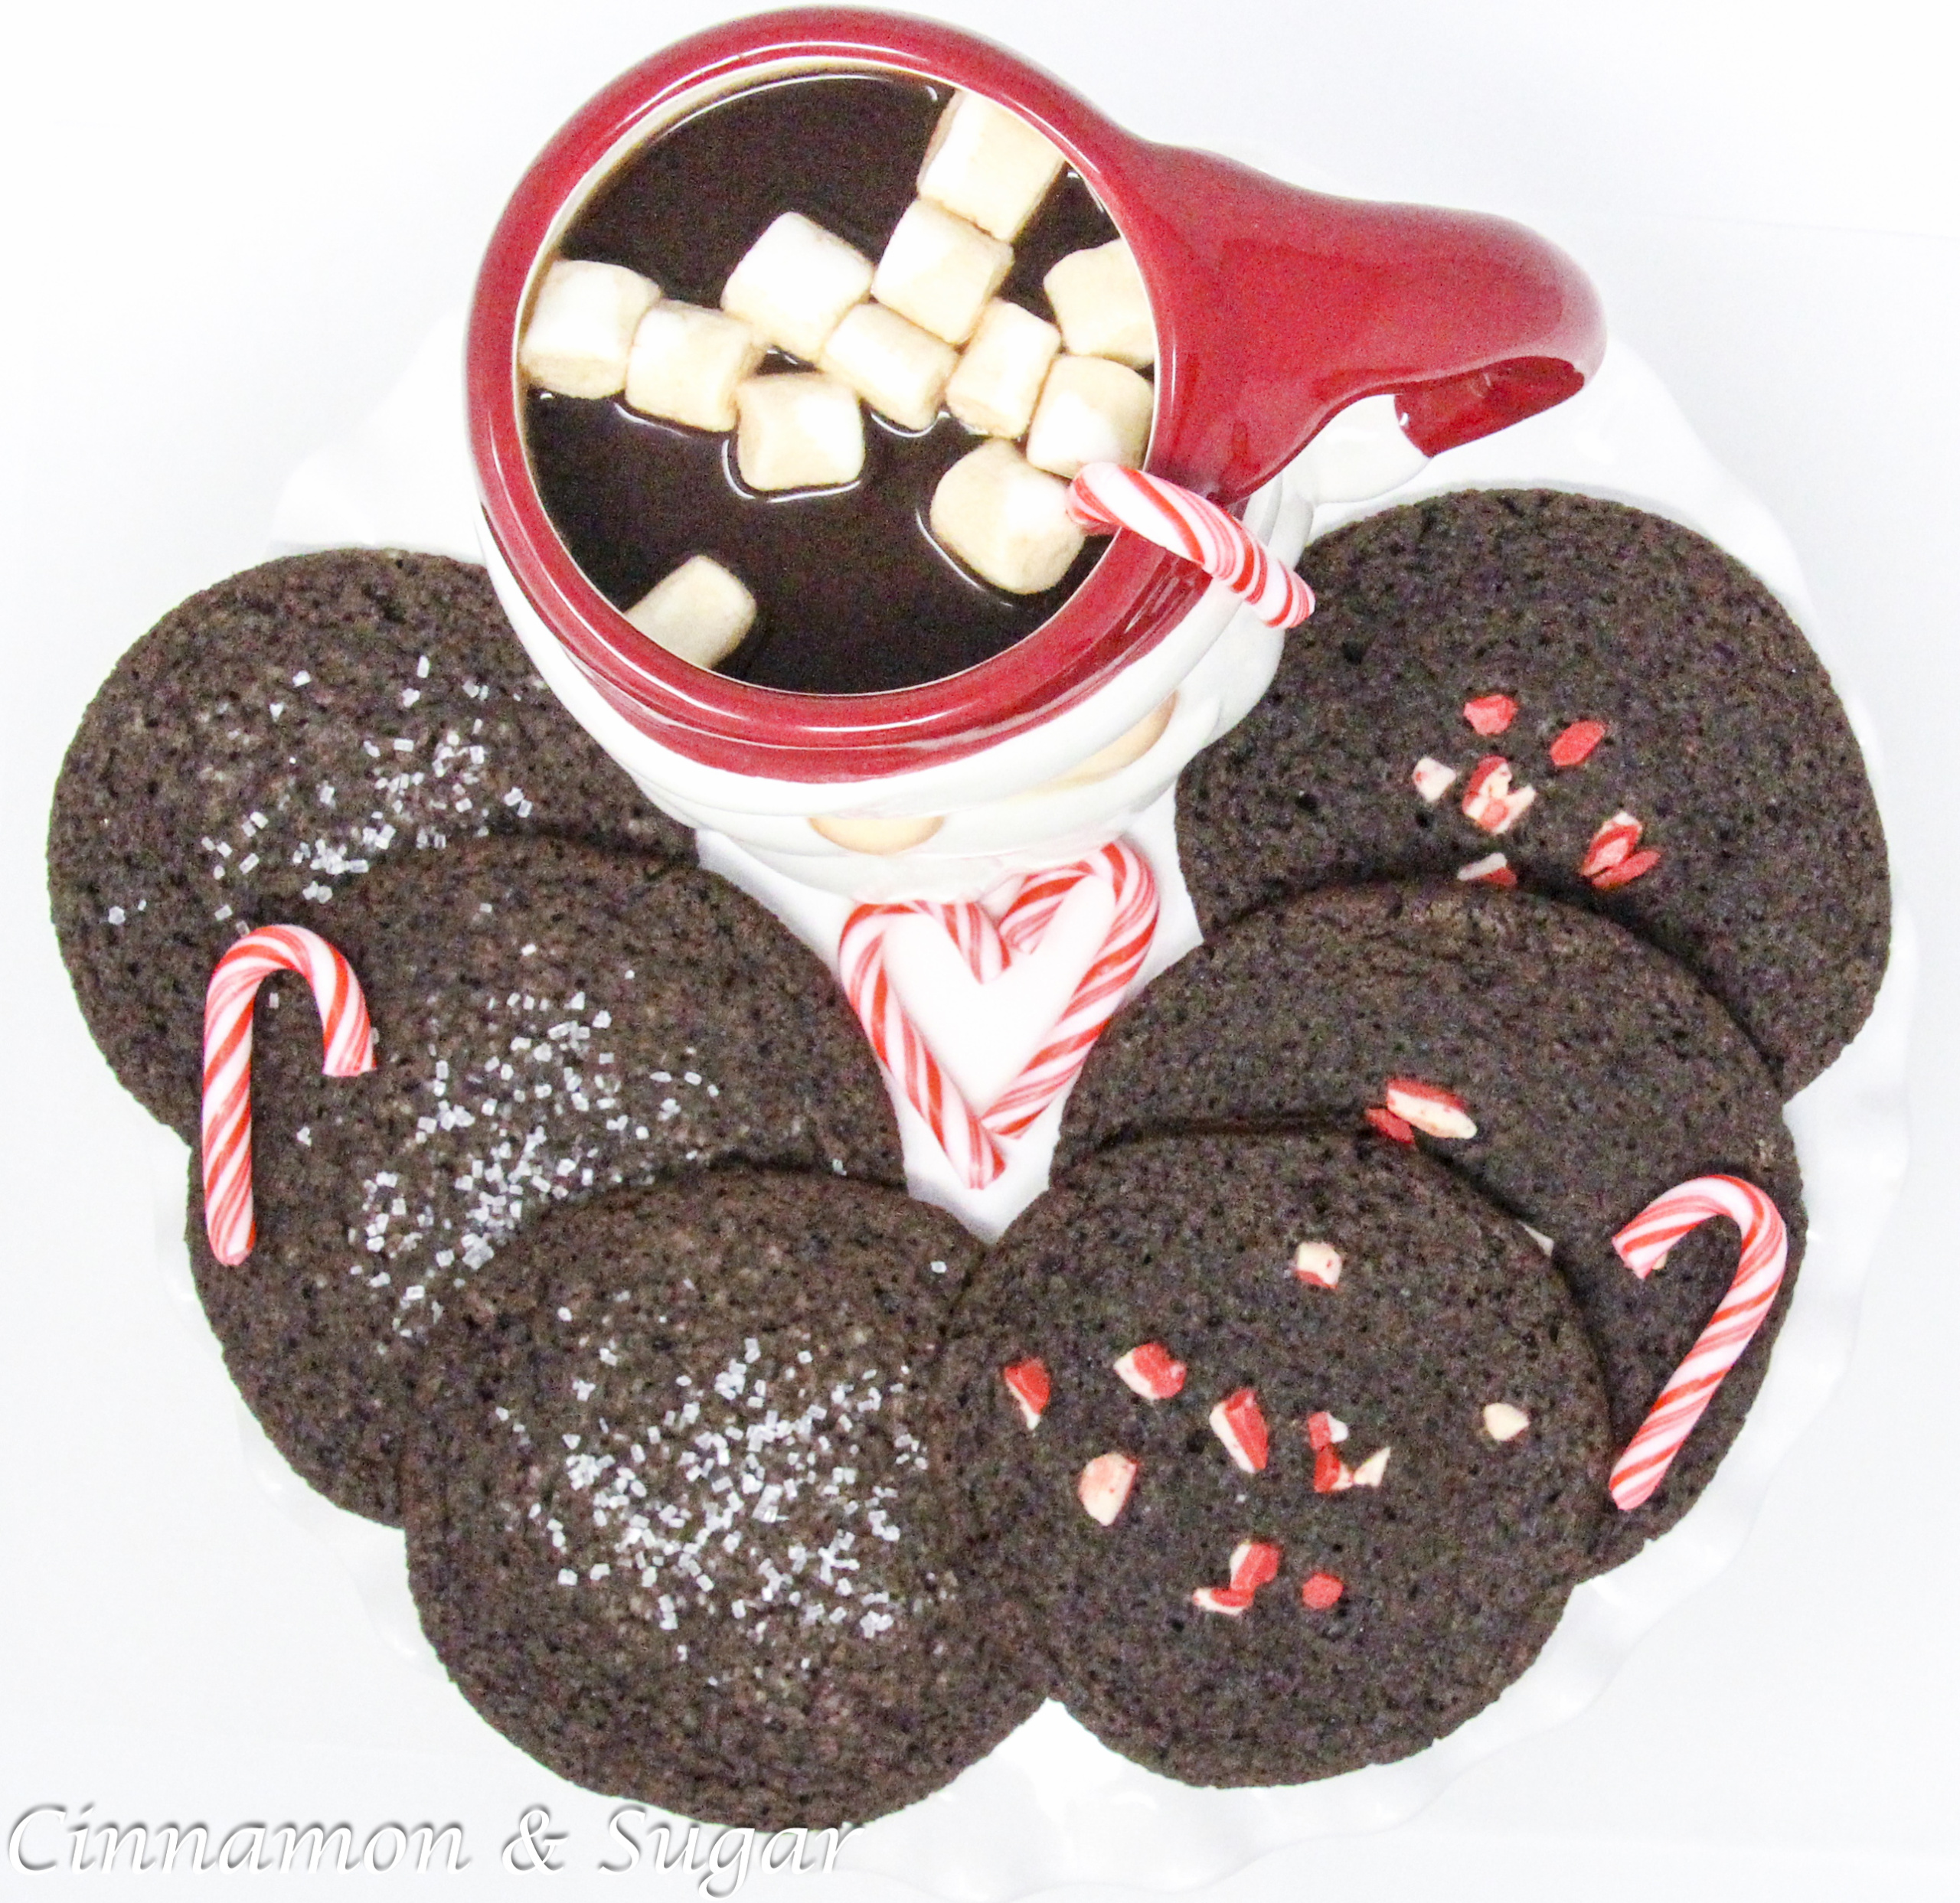 Santa's Favorite Chocolate Cookies are a bit soft and chewy on the inside and a little crisp around the edges. A sprinkle of coarse white sugar to mimic snow or a sprinkle of peppermint chips adds a festive flare. Recipe created by Cinnamon & Sugar for STARLIGHT AT MOONGLOW by Deborah Garner.